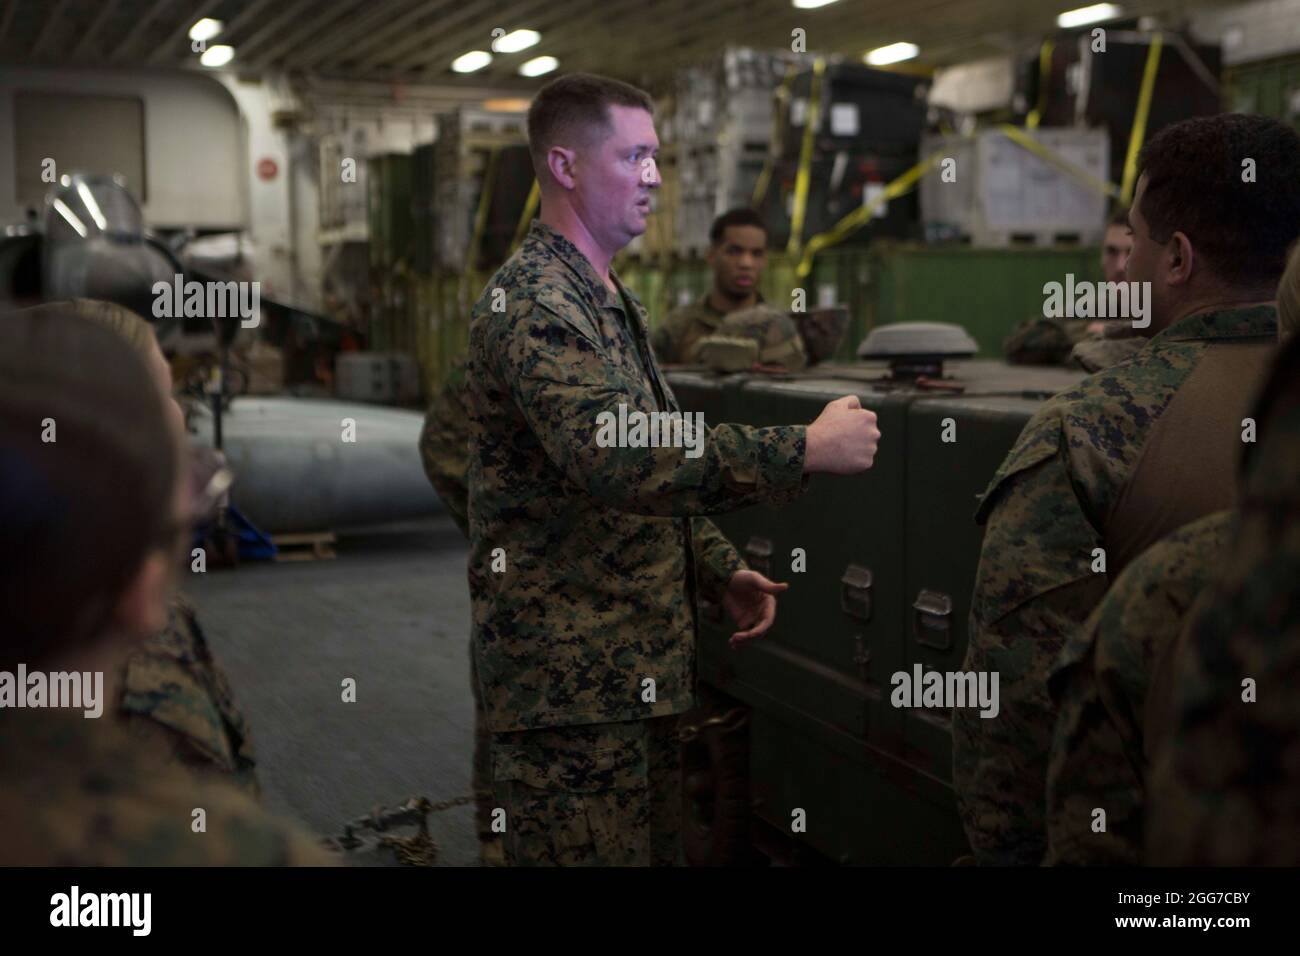 2100405-M-GJ479-005, USS IWO JIMA, Atlantic Ocean, April 5, 2021- U.S. Marine Corps Gunnery Sgt. Christopher McClane the communications chief for Combat Logistics Battalion 24, 24th Marine Expeditionary Unit (MEU), conducts a brief before an en route care exercise aboard the Wasp-class amphibious assault ship USS Iwo Jima (LHD 7), April 5, 2021. 24th MEU, embarked with the Iwo Jima Amphibious Ready Group, is forward deployed in the U.S. Sixth Fleet area of operations in support of U.S. national security interests in Europe and Africa. (U.S. Marine Corps photo by Staff Sergeant Mark E Morrow Jr Stock Photo